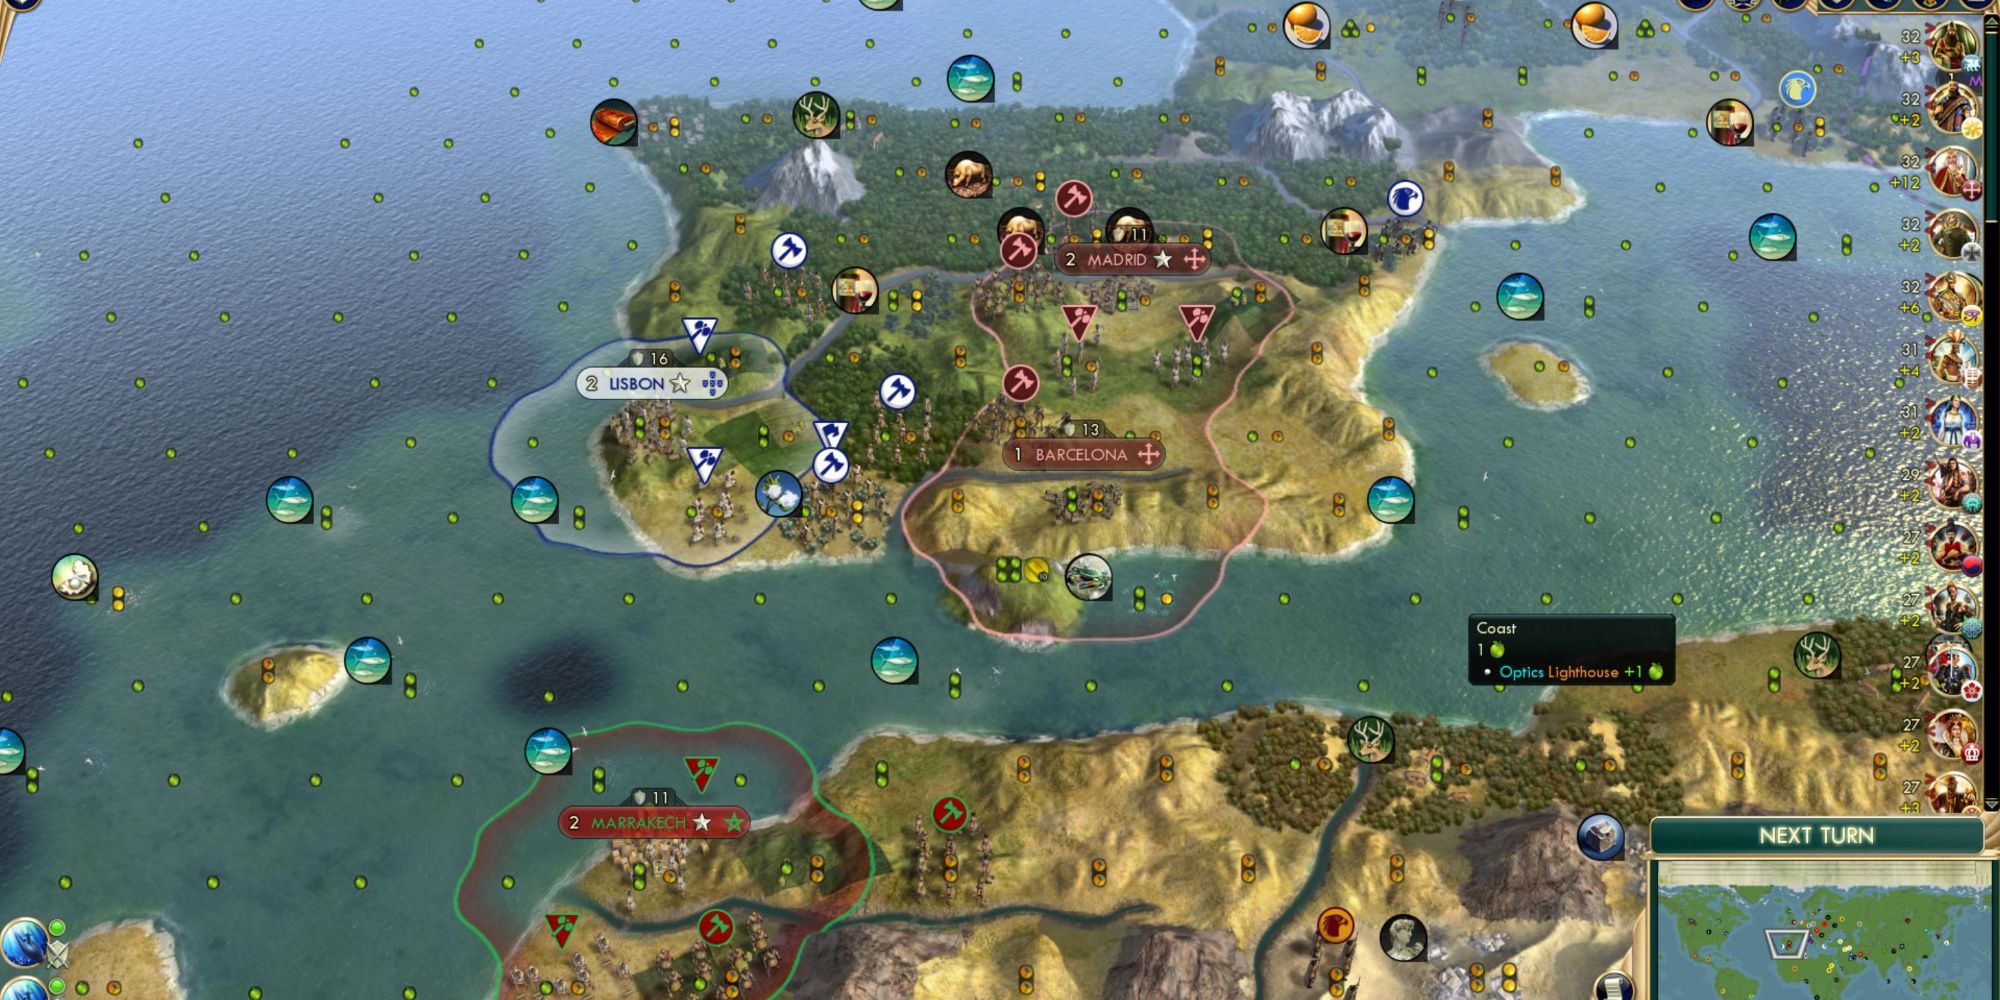 civ 5 cities on the coast around a piece of land resembling Spain